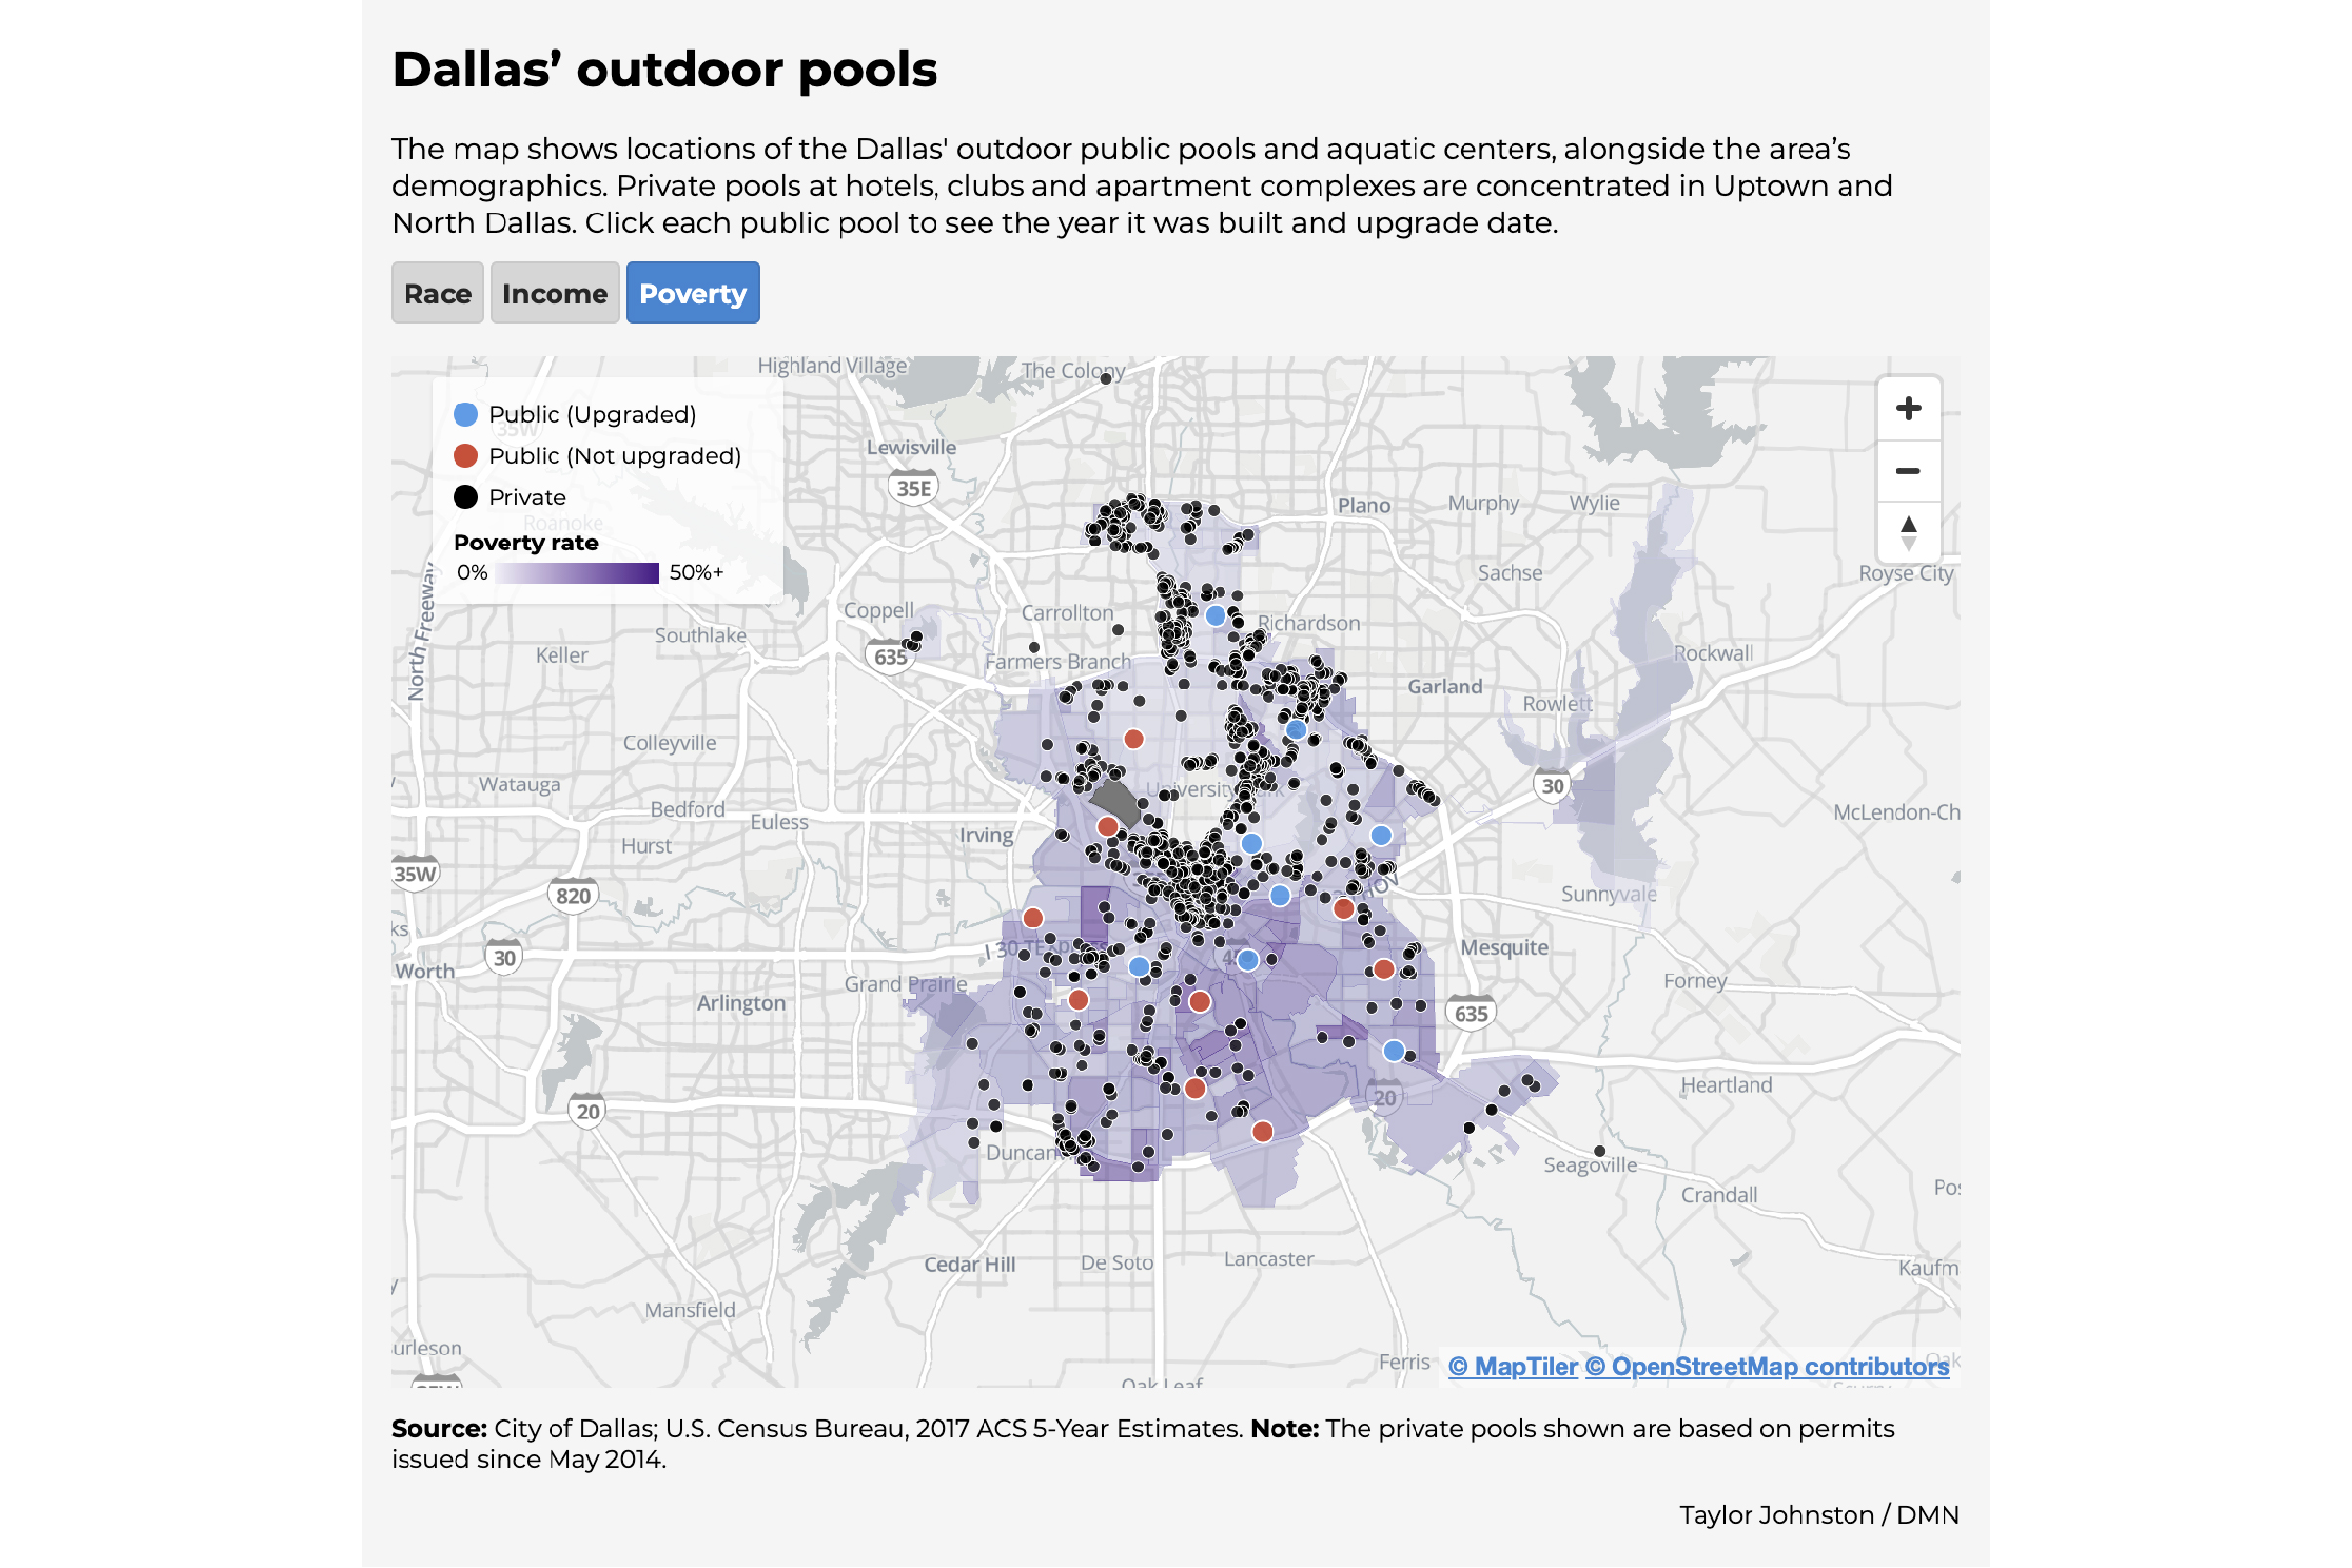 Interactive map of Dallas' public pools and the demographics of the areas they are located in